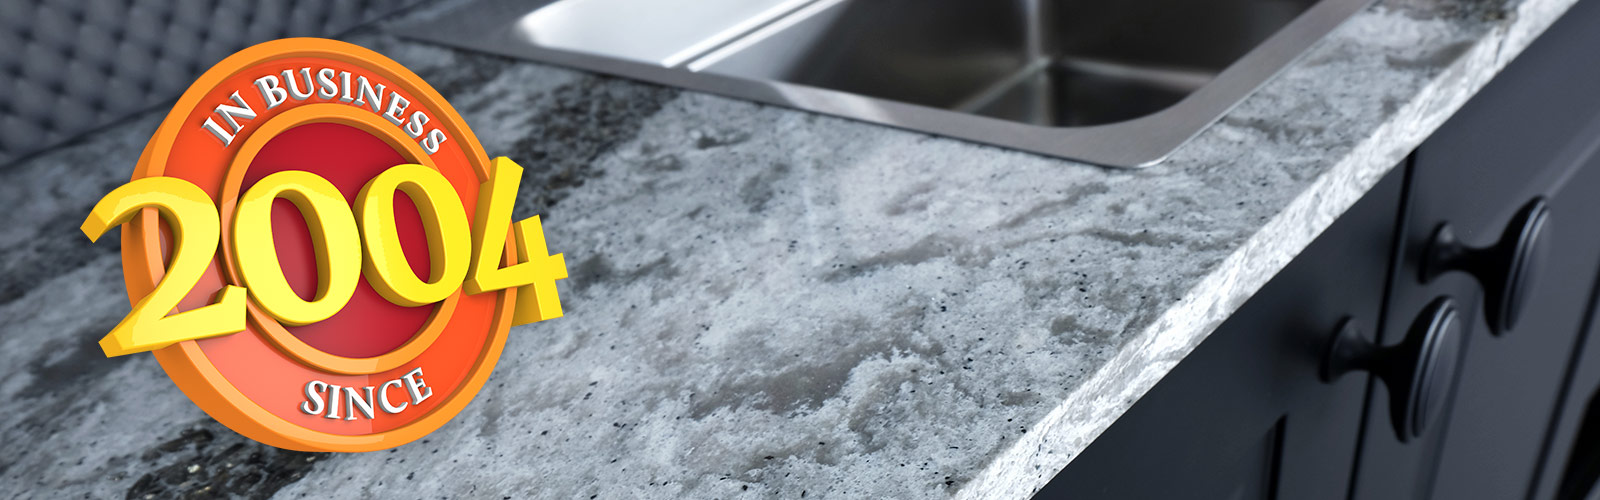 Lonnie's Stonecrafters carries an extensive inventory of granite, dolomite marble, soapstone, quartzite and quartz countertops.